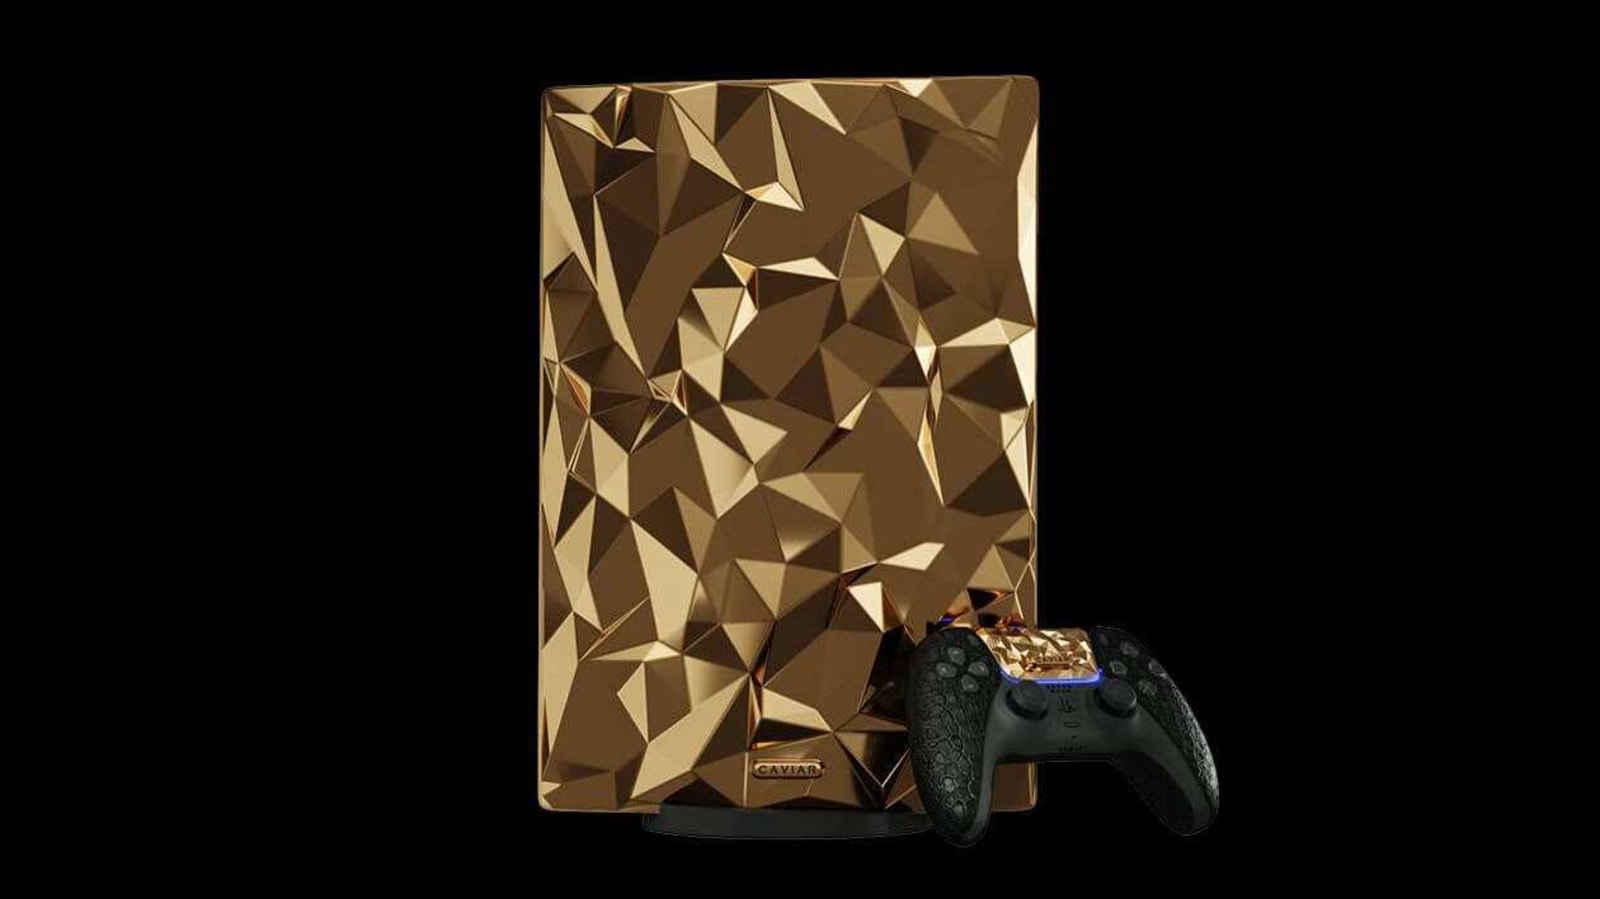 This luxe, golden PlayStation 5 edition is the PS5 of your dreams